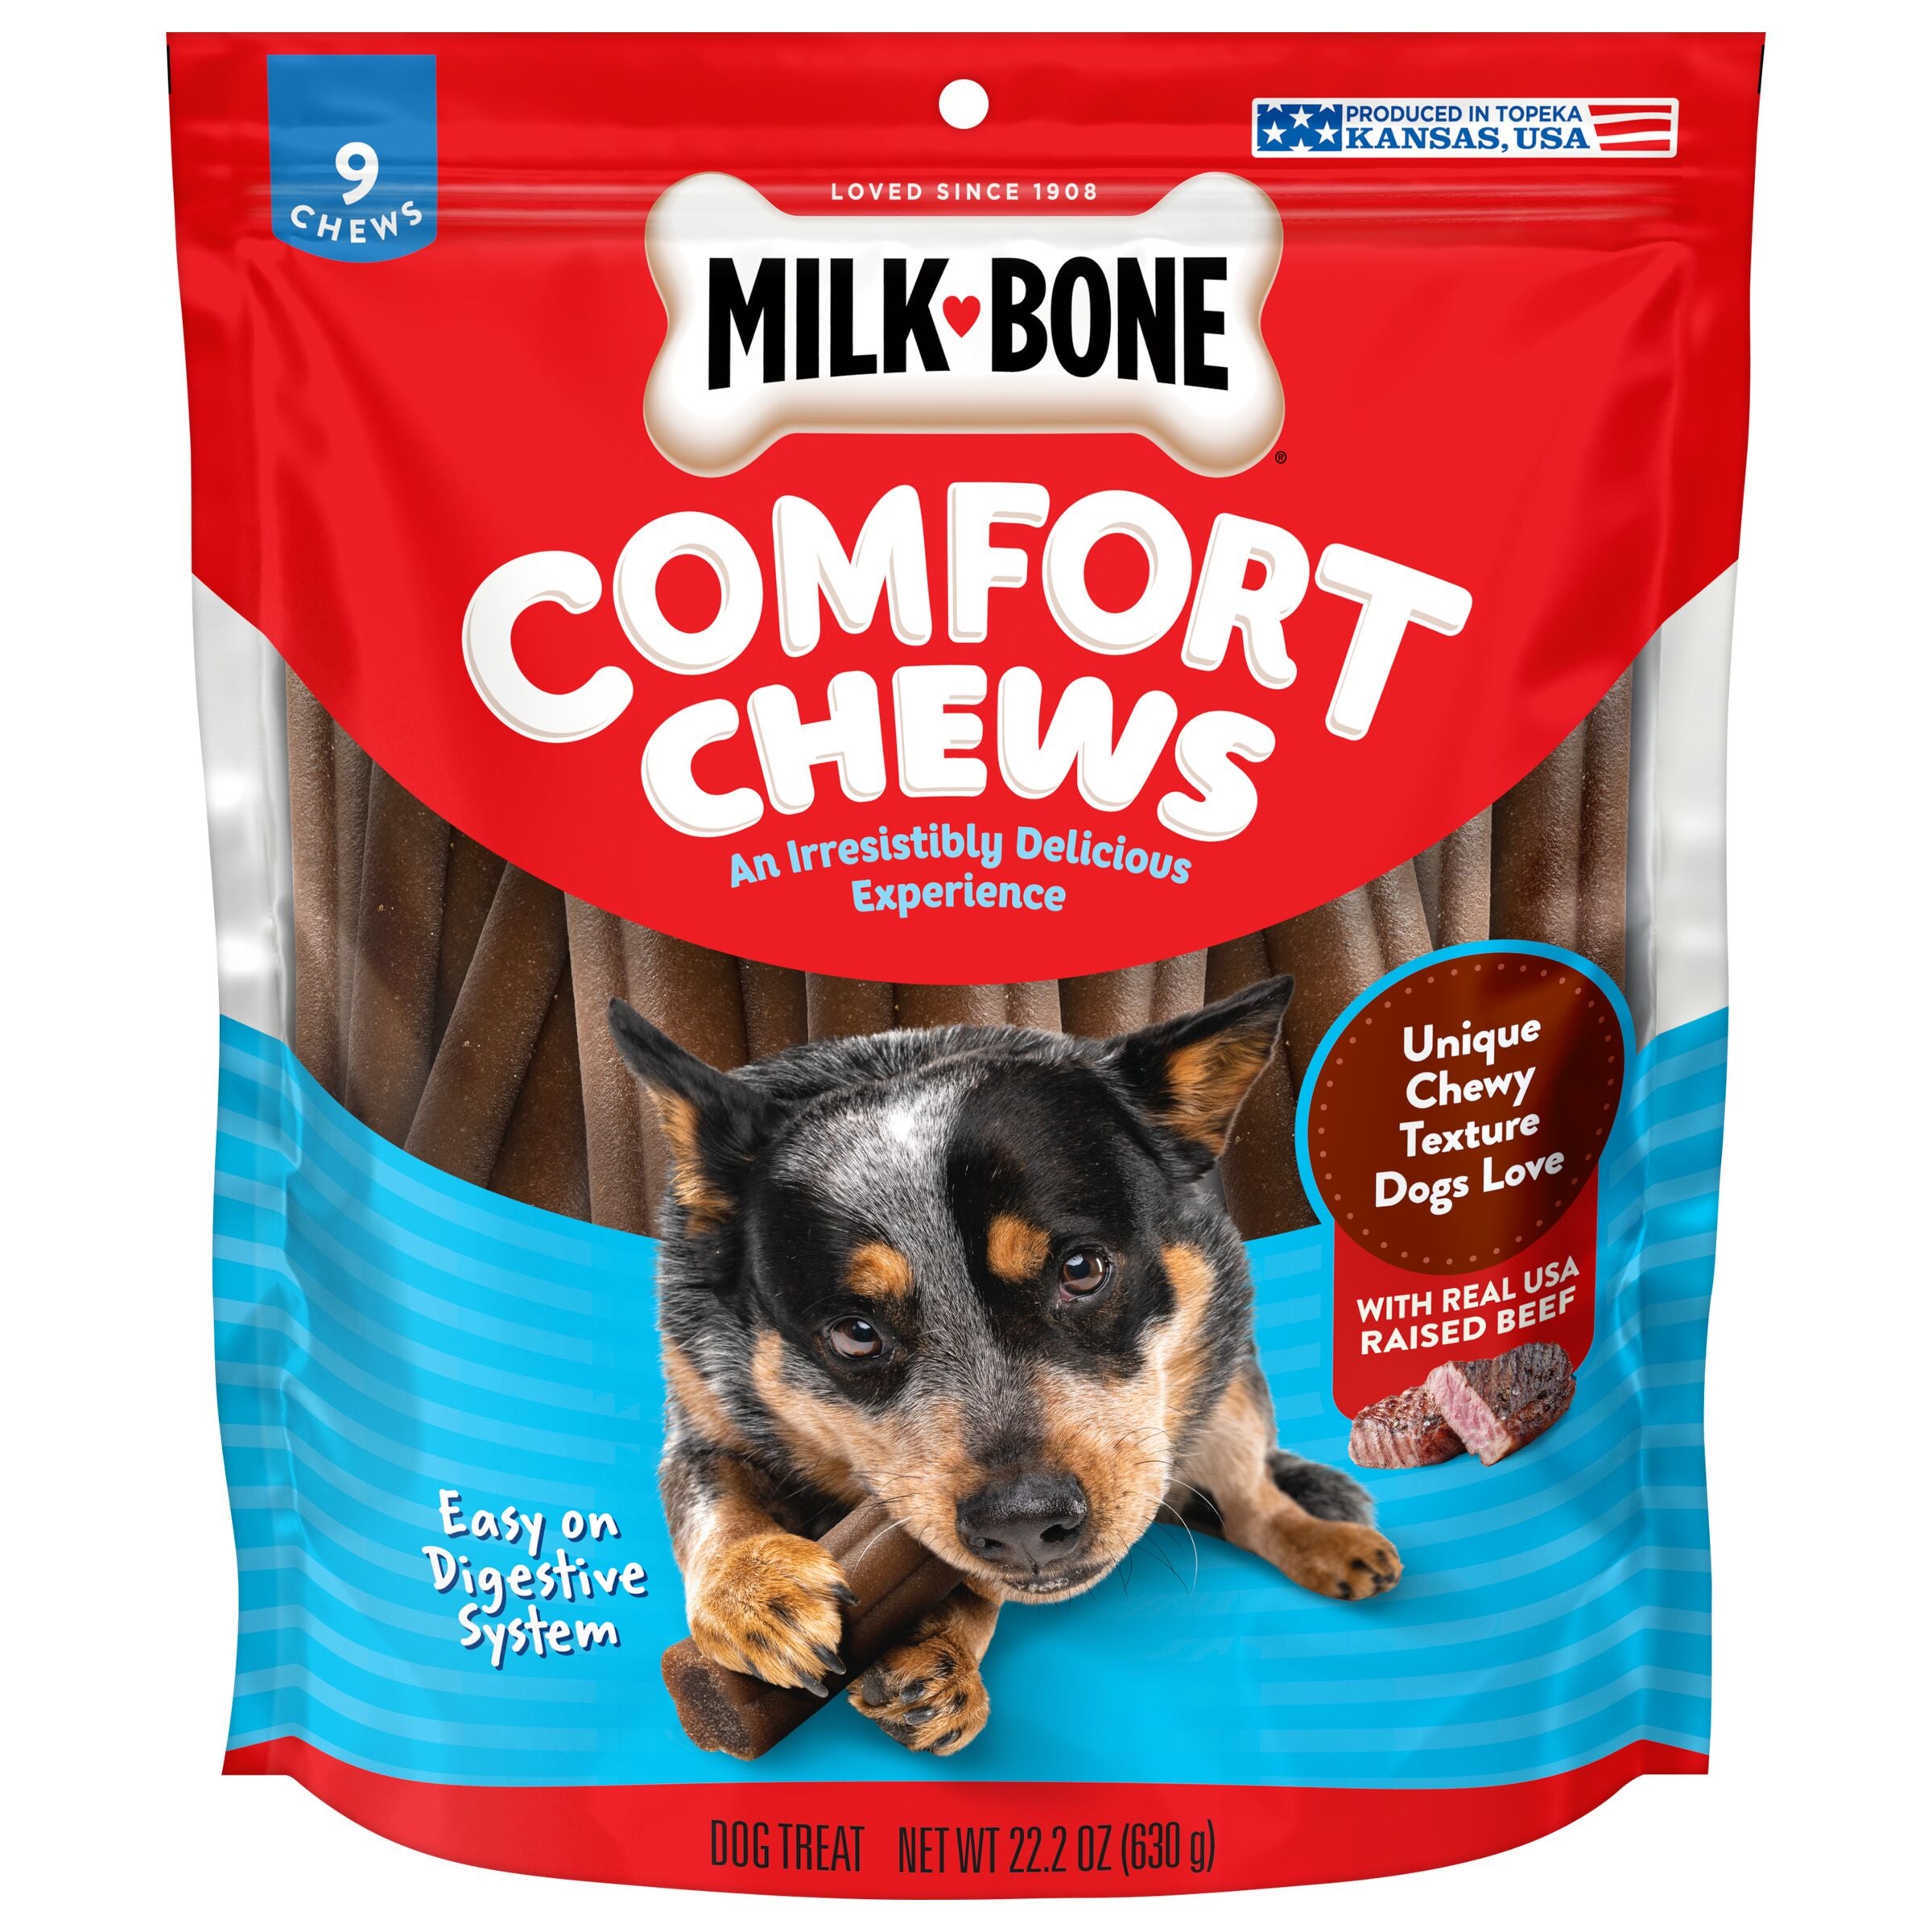 Milk-Bone Comfort Chews, Dog Chews with Unique Chewy Texture and Real Beef